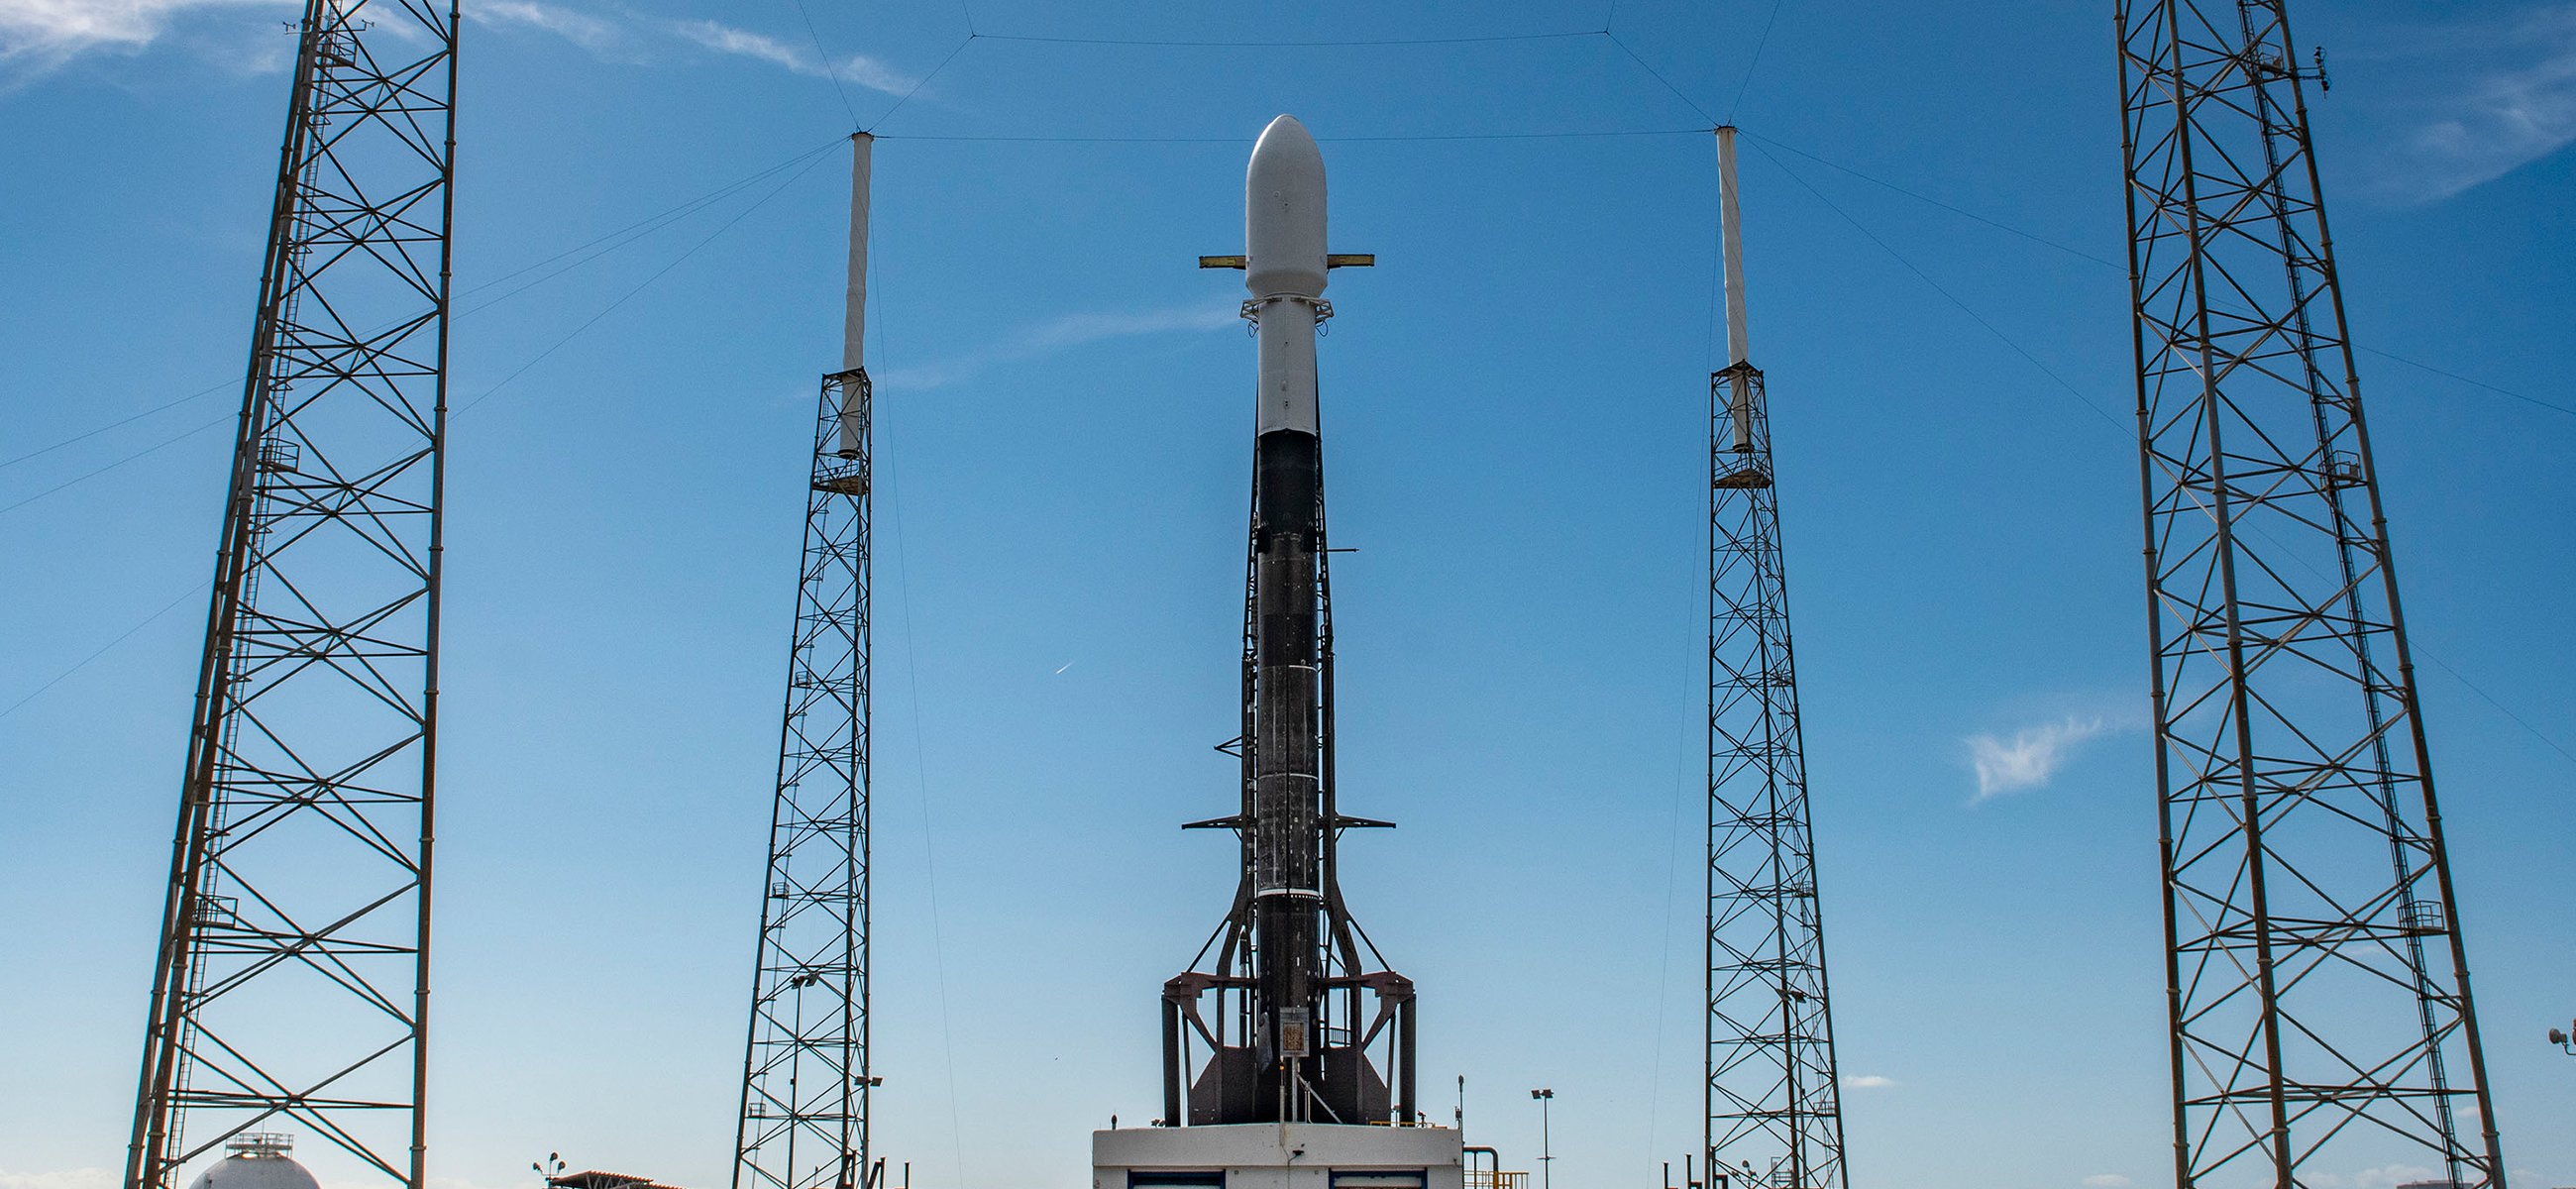 Falcon 9 on the SLC-40 launch pad before take-off with the Transporter-3 mission (Source: SpaceX)